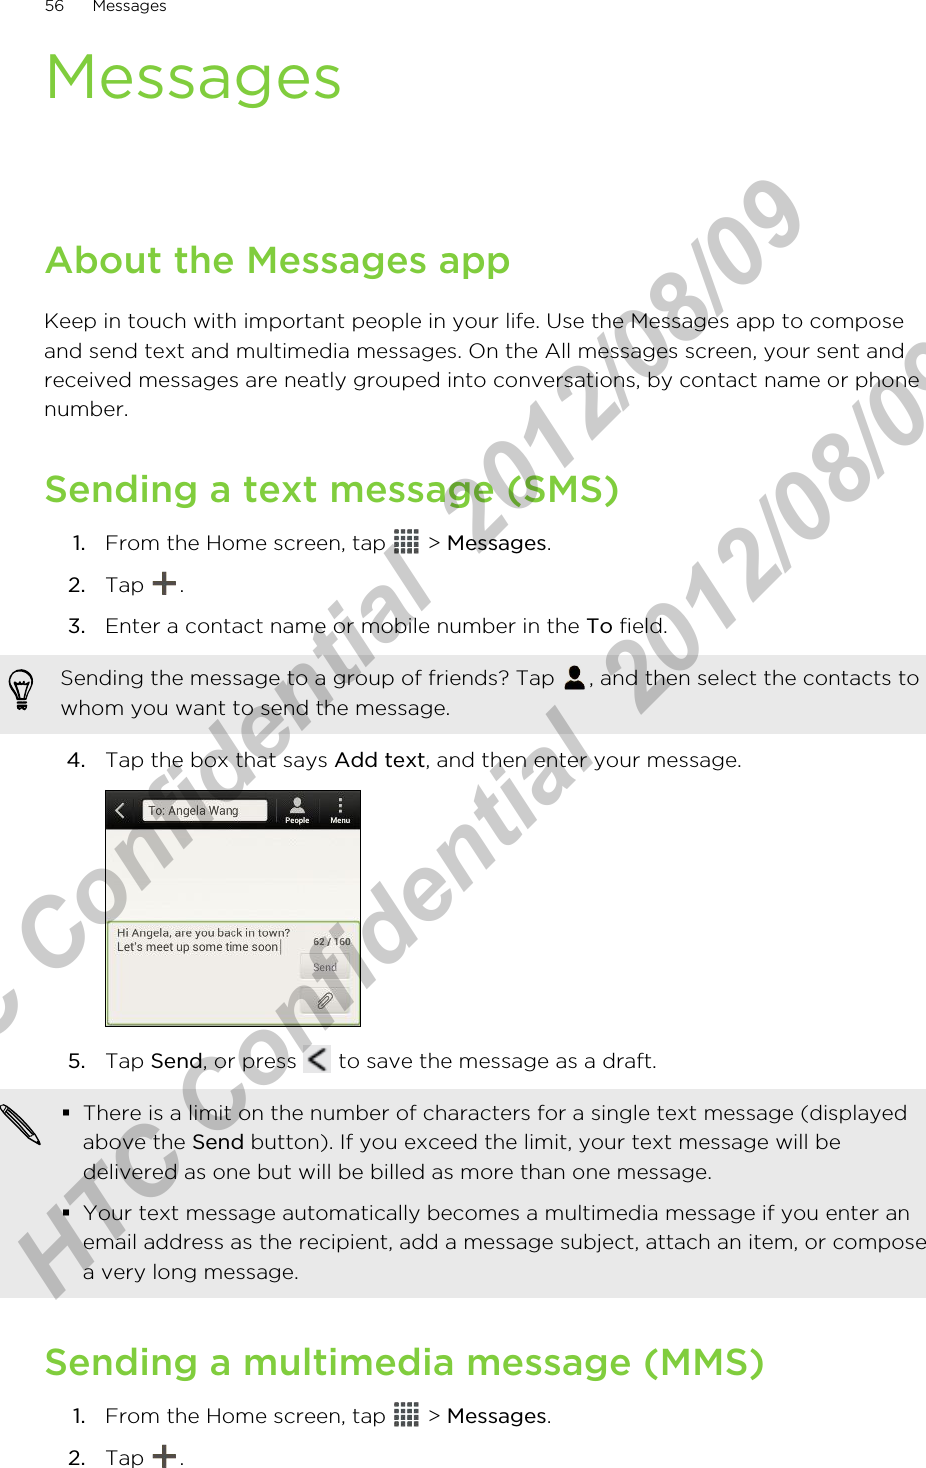 MessagesAbout the Messages appKeep in touch with important people in your life. Use the Messages app to composeand send text and multimedia messages. On the All messages screen, your sent andreceived messages are neatly grouped into conversations, by contact name or phonenumber.Sending a text message (SMS)1. From the Home screen, tap   &gt; Messages.2. Tap  .3. Enter a contact name or mobile number in the To field. Sending the message to a group of friends? Tap  , and then select the contacts towhom you want to send the message.4. Tap the box that says Add text, and then enter your message. 5. Tap Send, or press   to save the message as a draft. §There is a limit on the number of characters for a single text message (displayedabove the Send button). If you exceed the limit, your text message will bedelivered as one but will be billed as more than one message.§Your text message automatically becomes a multimedia message if you enter anemail address as the recipient, add a message subject, attach an item, or composea very long message.Sending a multimedia message (MMS)1. From the Home screen, tap   &gt; Messages.2. Tap  .56 MessagesHTC Confidential  2012/08/09  HTC Confidential  2012/08/09 